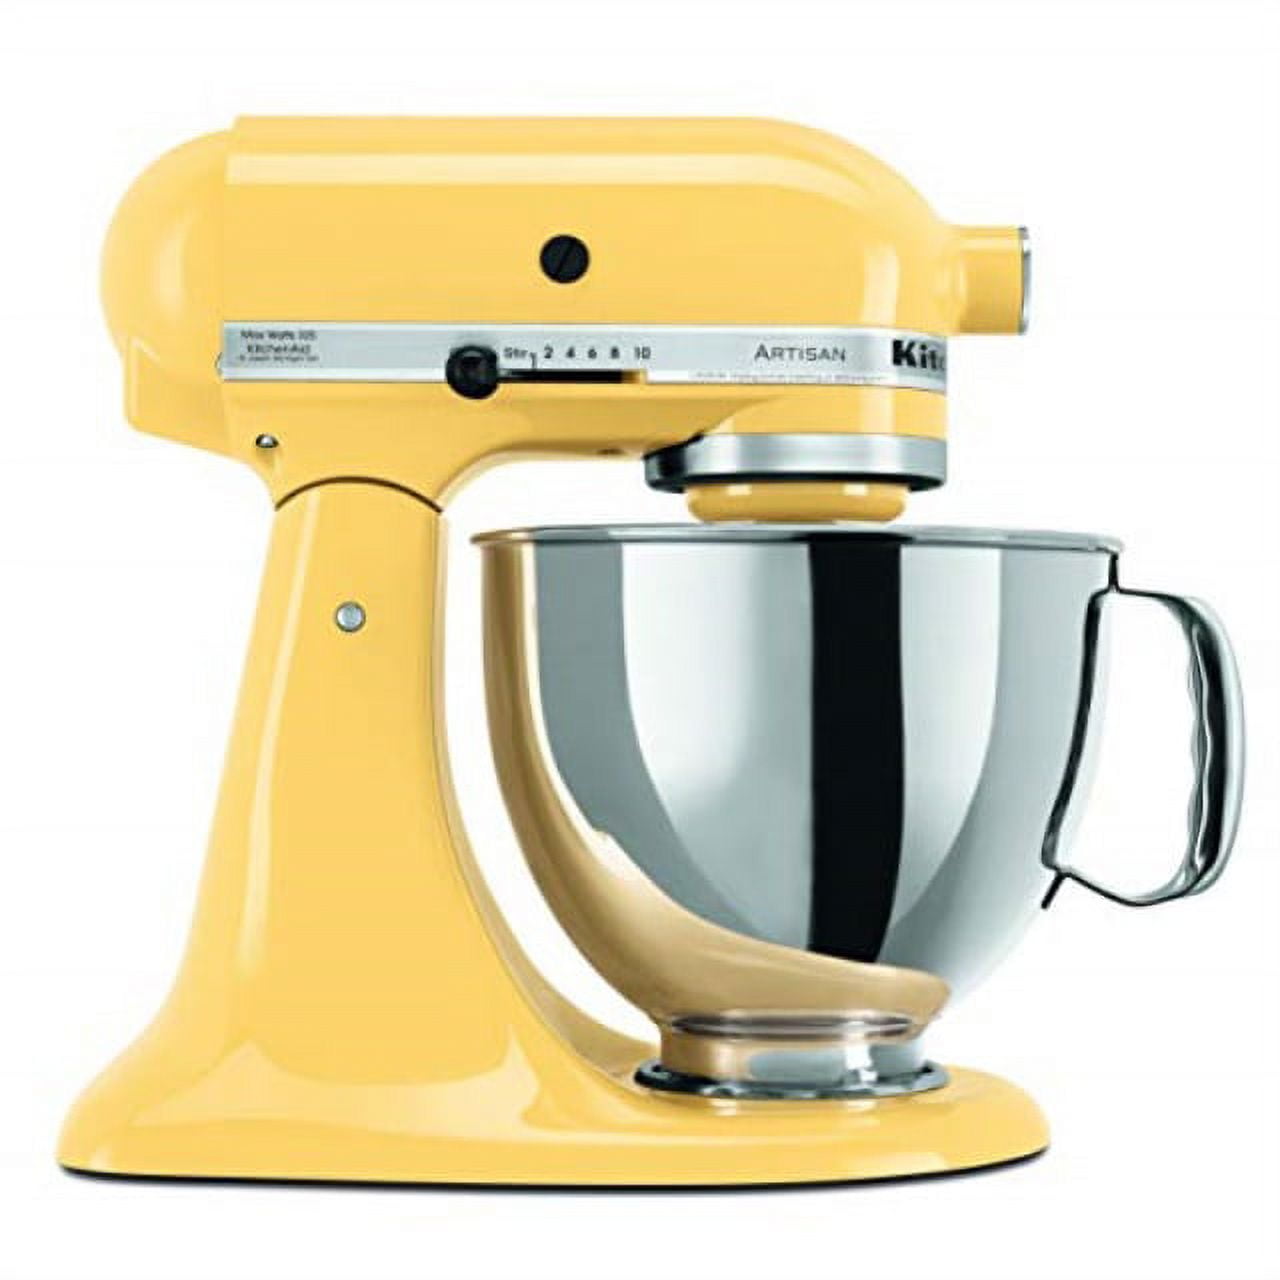  KitchenAid Artisan Series 5 Quart Tilt Head Stand Mixer with  Pouring Shield KSM150PS, Majestic Yellow: Electric Stand Mixers: Home &  Kitchen